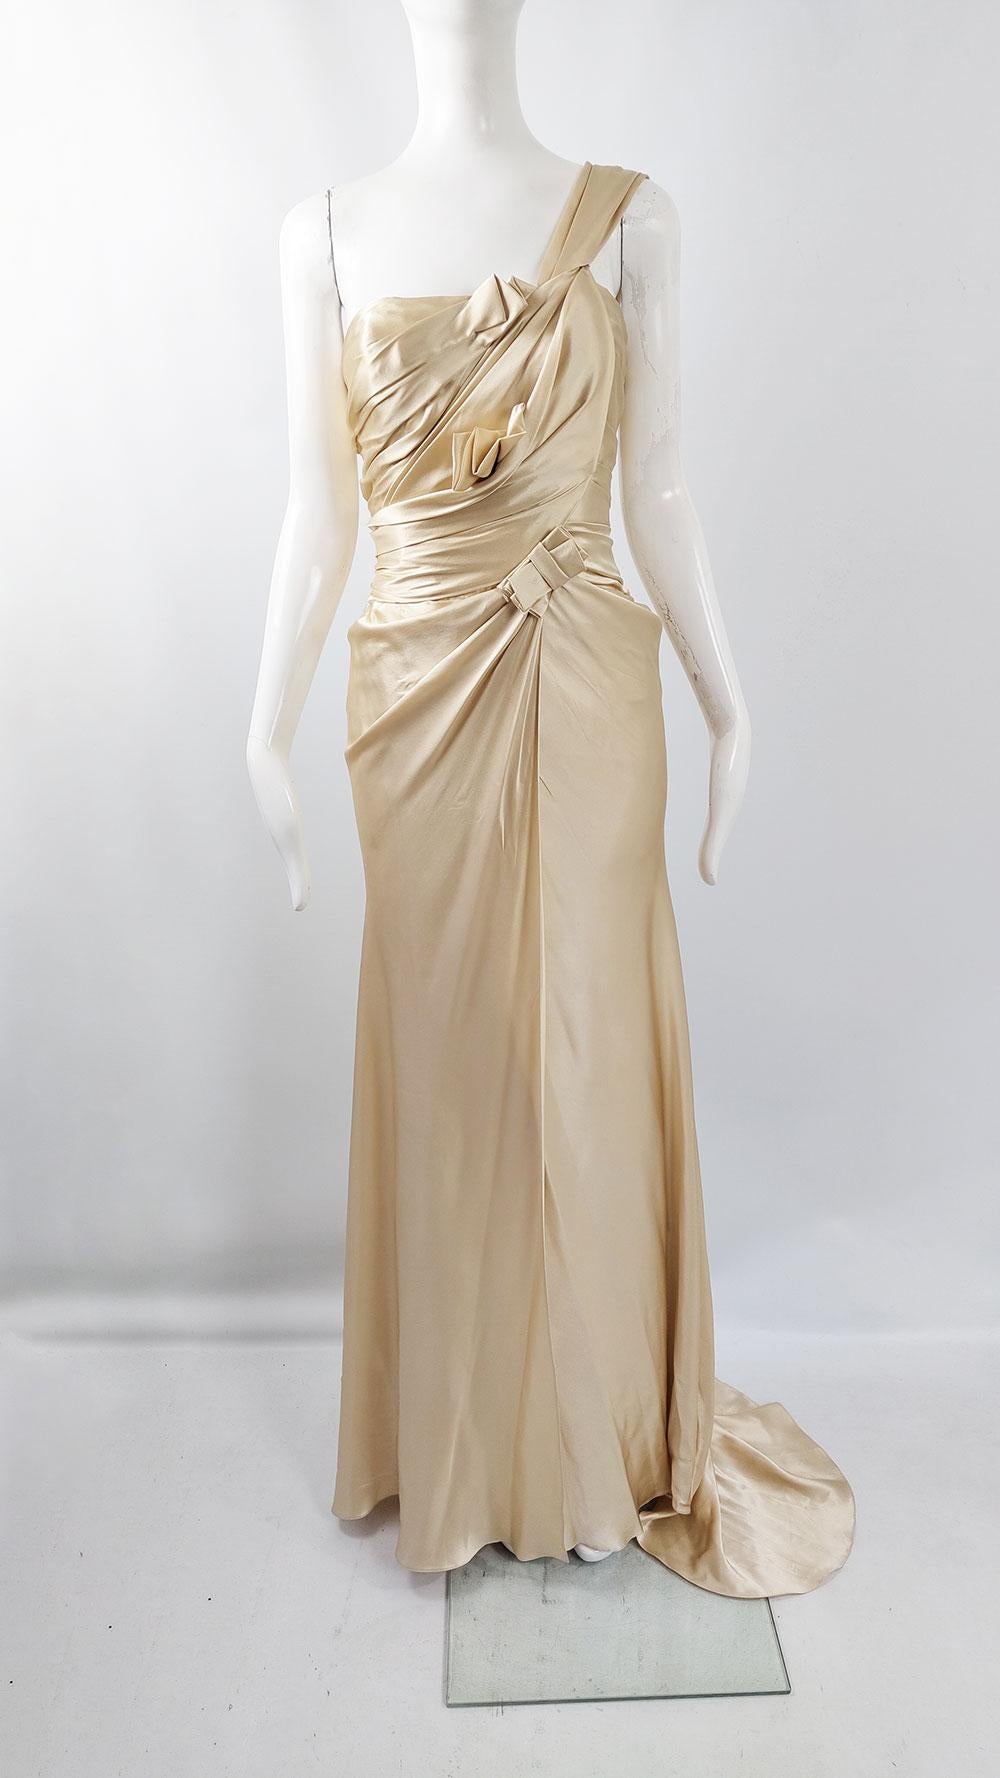 David Fielden Vintage Pale Gold Pure Silk Satin Wedding Evening Gown Dress In Good Condition For Sale In Doncaster, South Yorkshire